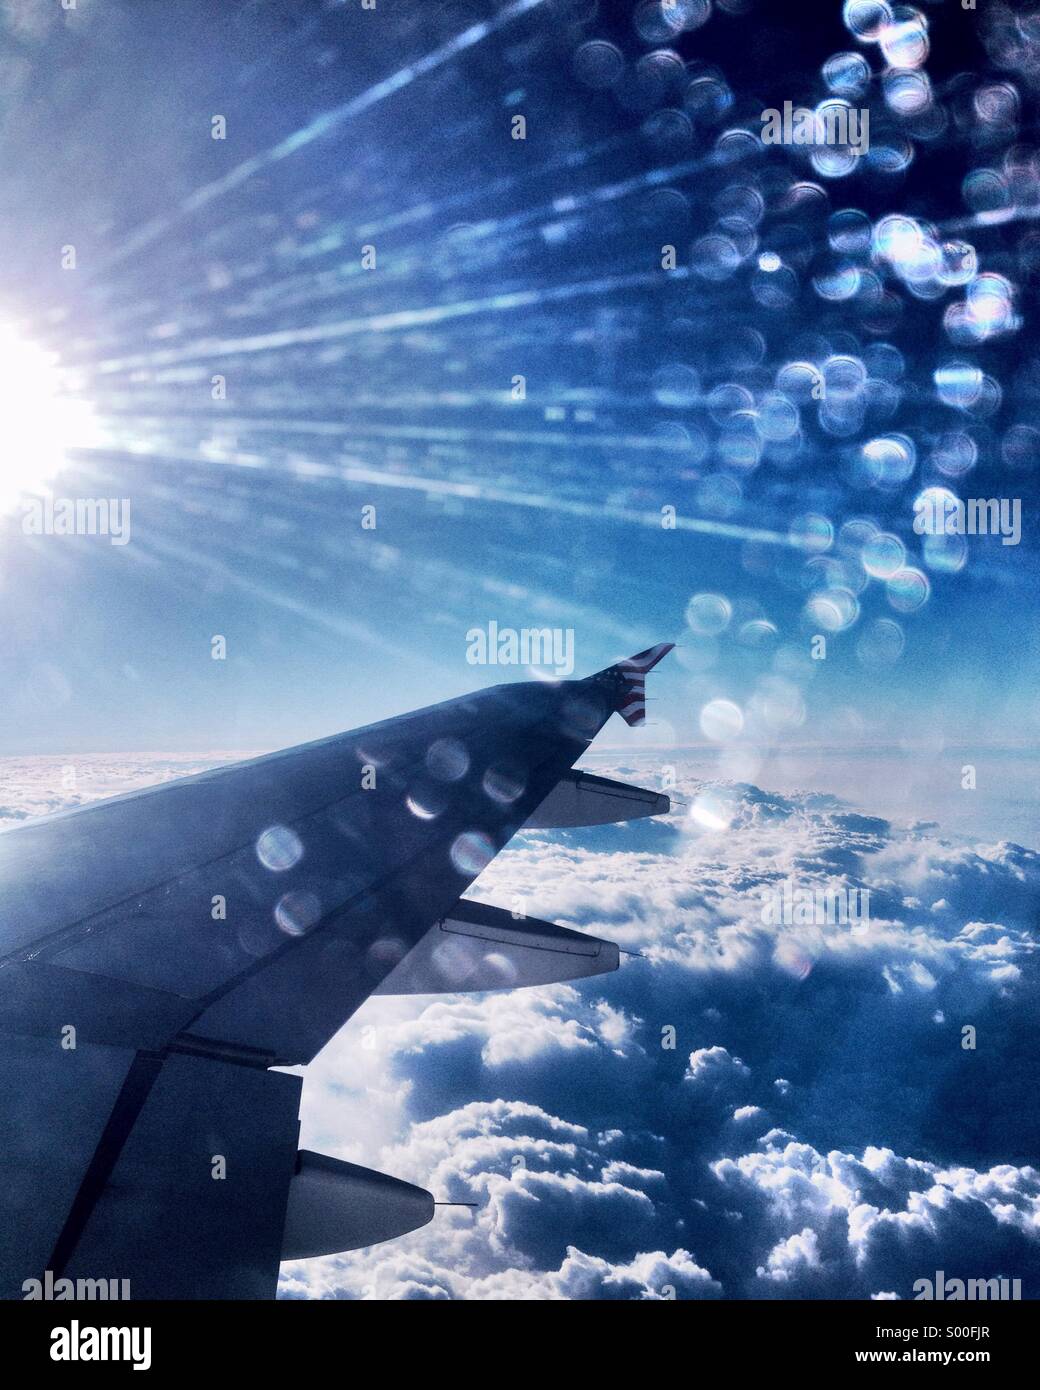 Looking through the airplane window, sun flare over the wing in a cloudy blue sky Stock Photo